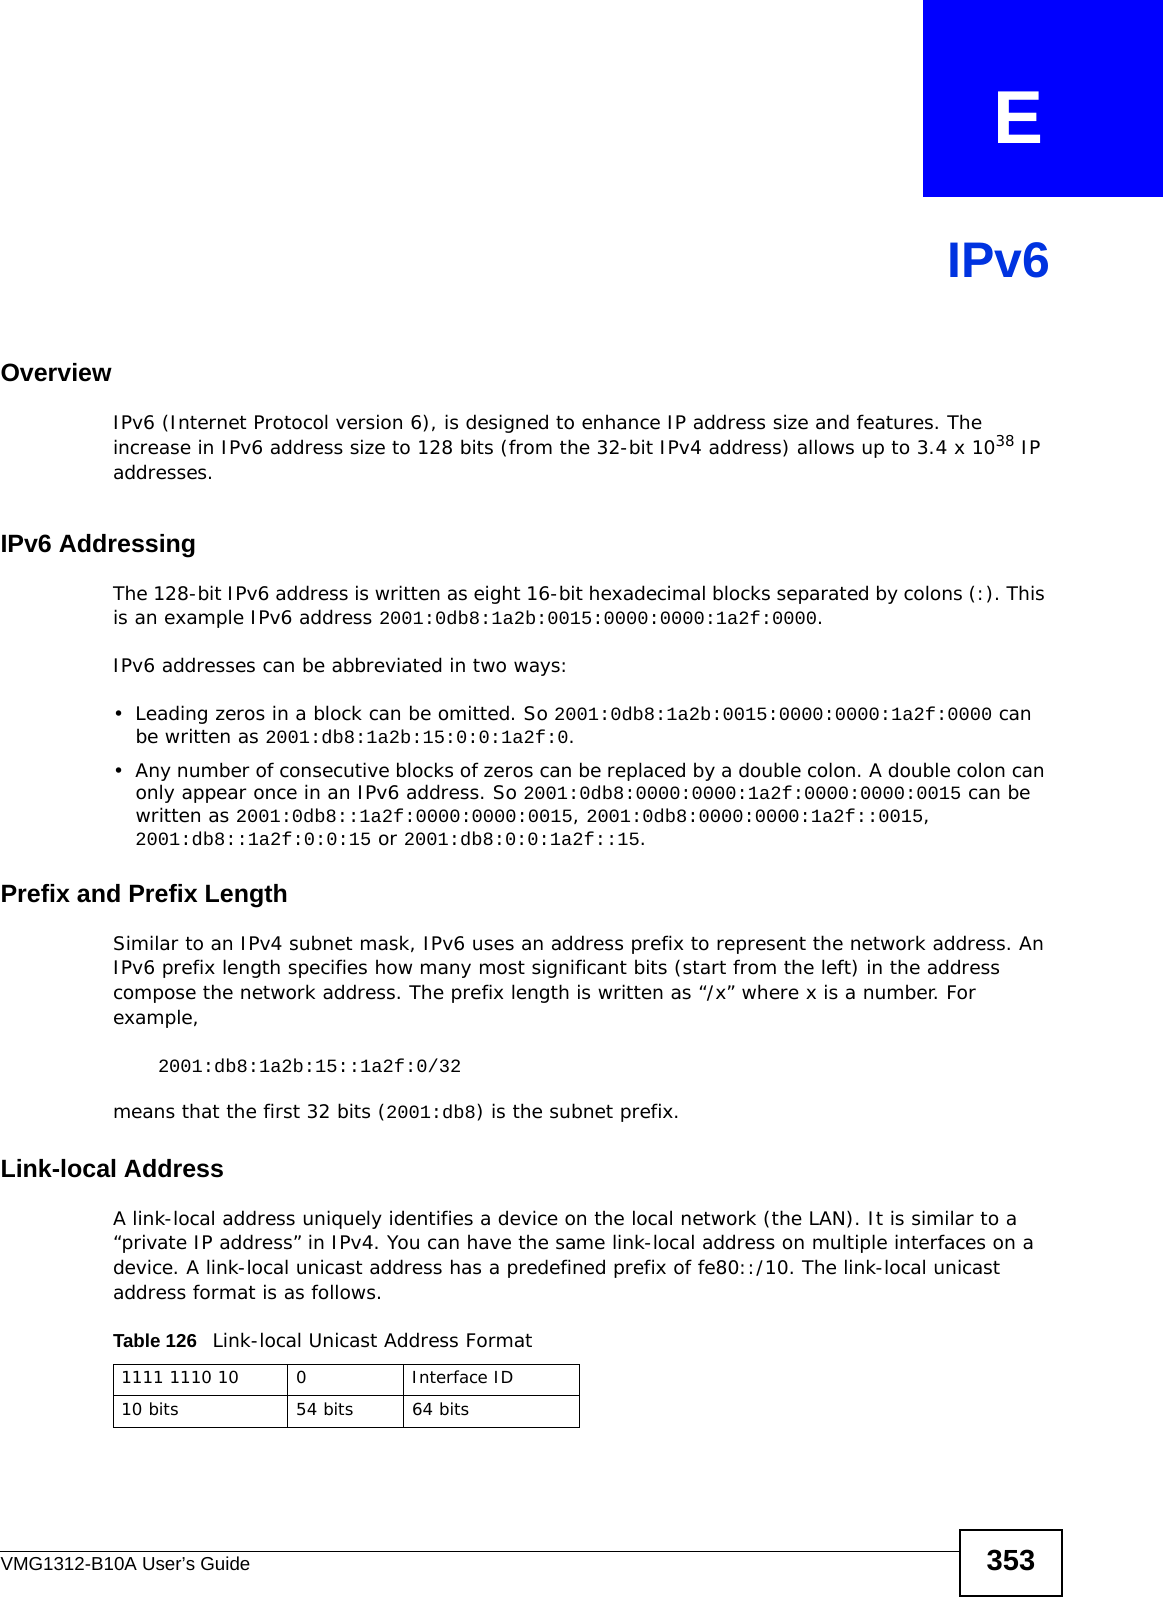 VMG1312-B10A User’s Guide 353APPENDIX   EIPv6OverviewIPv6 (Internet Protocol version 6), is designed to enhance IP address size and features. The increase in IPv6 address size to 128 bits (from the 32-bit IPv4 address) allows up to 3.4 x 1038 IP addresses. IPv6 AddressingThe 128-bit IPv6 address is written as eight 16-bit hexadecimal blocks separated by colons (:). This is an example IPv6 address 2001:0db8:1a2b:0015:0000:0000:1a2f:0000. IPv6 addresses can be abbreviated in two ways:• Leading zeros in a block can be omitted. So 2001:0db8:1a2b:0015:0000:0000:1a2f:0000 can be written as 2001:db8:1a2b:15:0:0:1a2f:0. • Any number of consecutive blocks of zeros can be replaced by a double colon. A double colon can only appear once in an IPv6 address. So 2001:0db8:0000:0000:1a2f:0000:0000:0015 can be written as 2001:0db8::1a2f:0000:0000:0015, 2001:0db8:0000:0000:1a2f::0015, 2001:db8::1a2f:0:0:15 or 2001:db8:0:0:1a2f::15.Prefix and Prefix LengthSimilar to an IPv4 subnet mask, IPv6 uses an address prefix to represent the network address. An IPv6 prefix length specifies how many most significant bits (start from the left) in the address compose the network address. The prefix length is written as “/x” where x is a number. For example, 2001:db8:1a2b:15::1a2f:0/32means that the first 32 bits (2001:db8) is the subnet prefix. Link-local AddressA link-local address uniquely identifies a device on the local network (the LAN). It is similar to a “private IP address” in IPv4. You can have the same link-local address on multiple interfaces on a device. A link-local unicast address has a predefined prefix of fe80::/10. The link-local unicast address format is as follows.Table 126   Link-local Unicast Address Format1111 1110 10 0 Interface ID10 bits 54 bits 64 bits